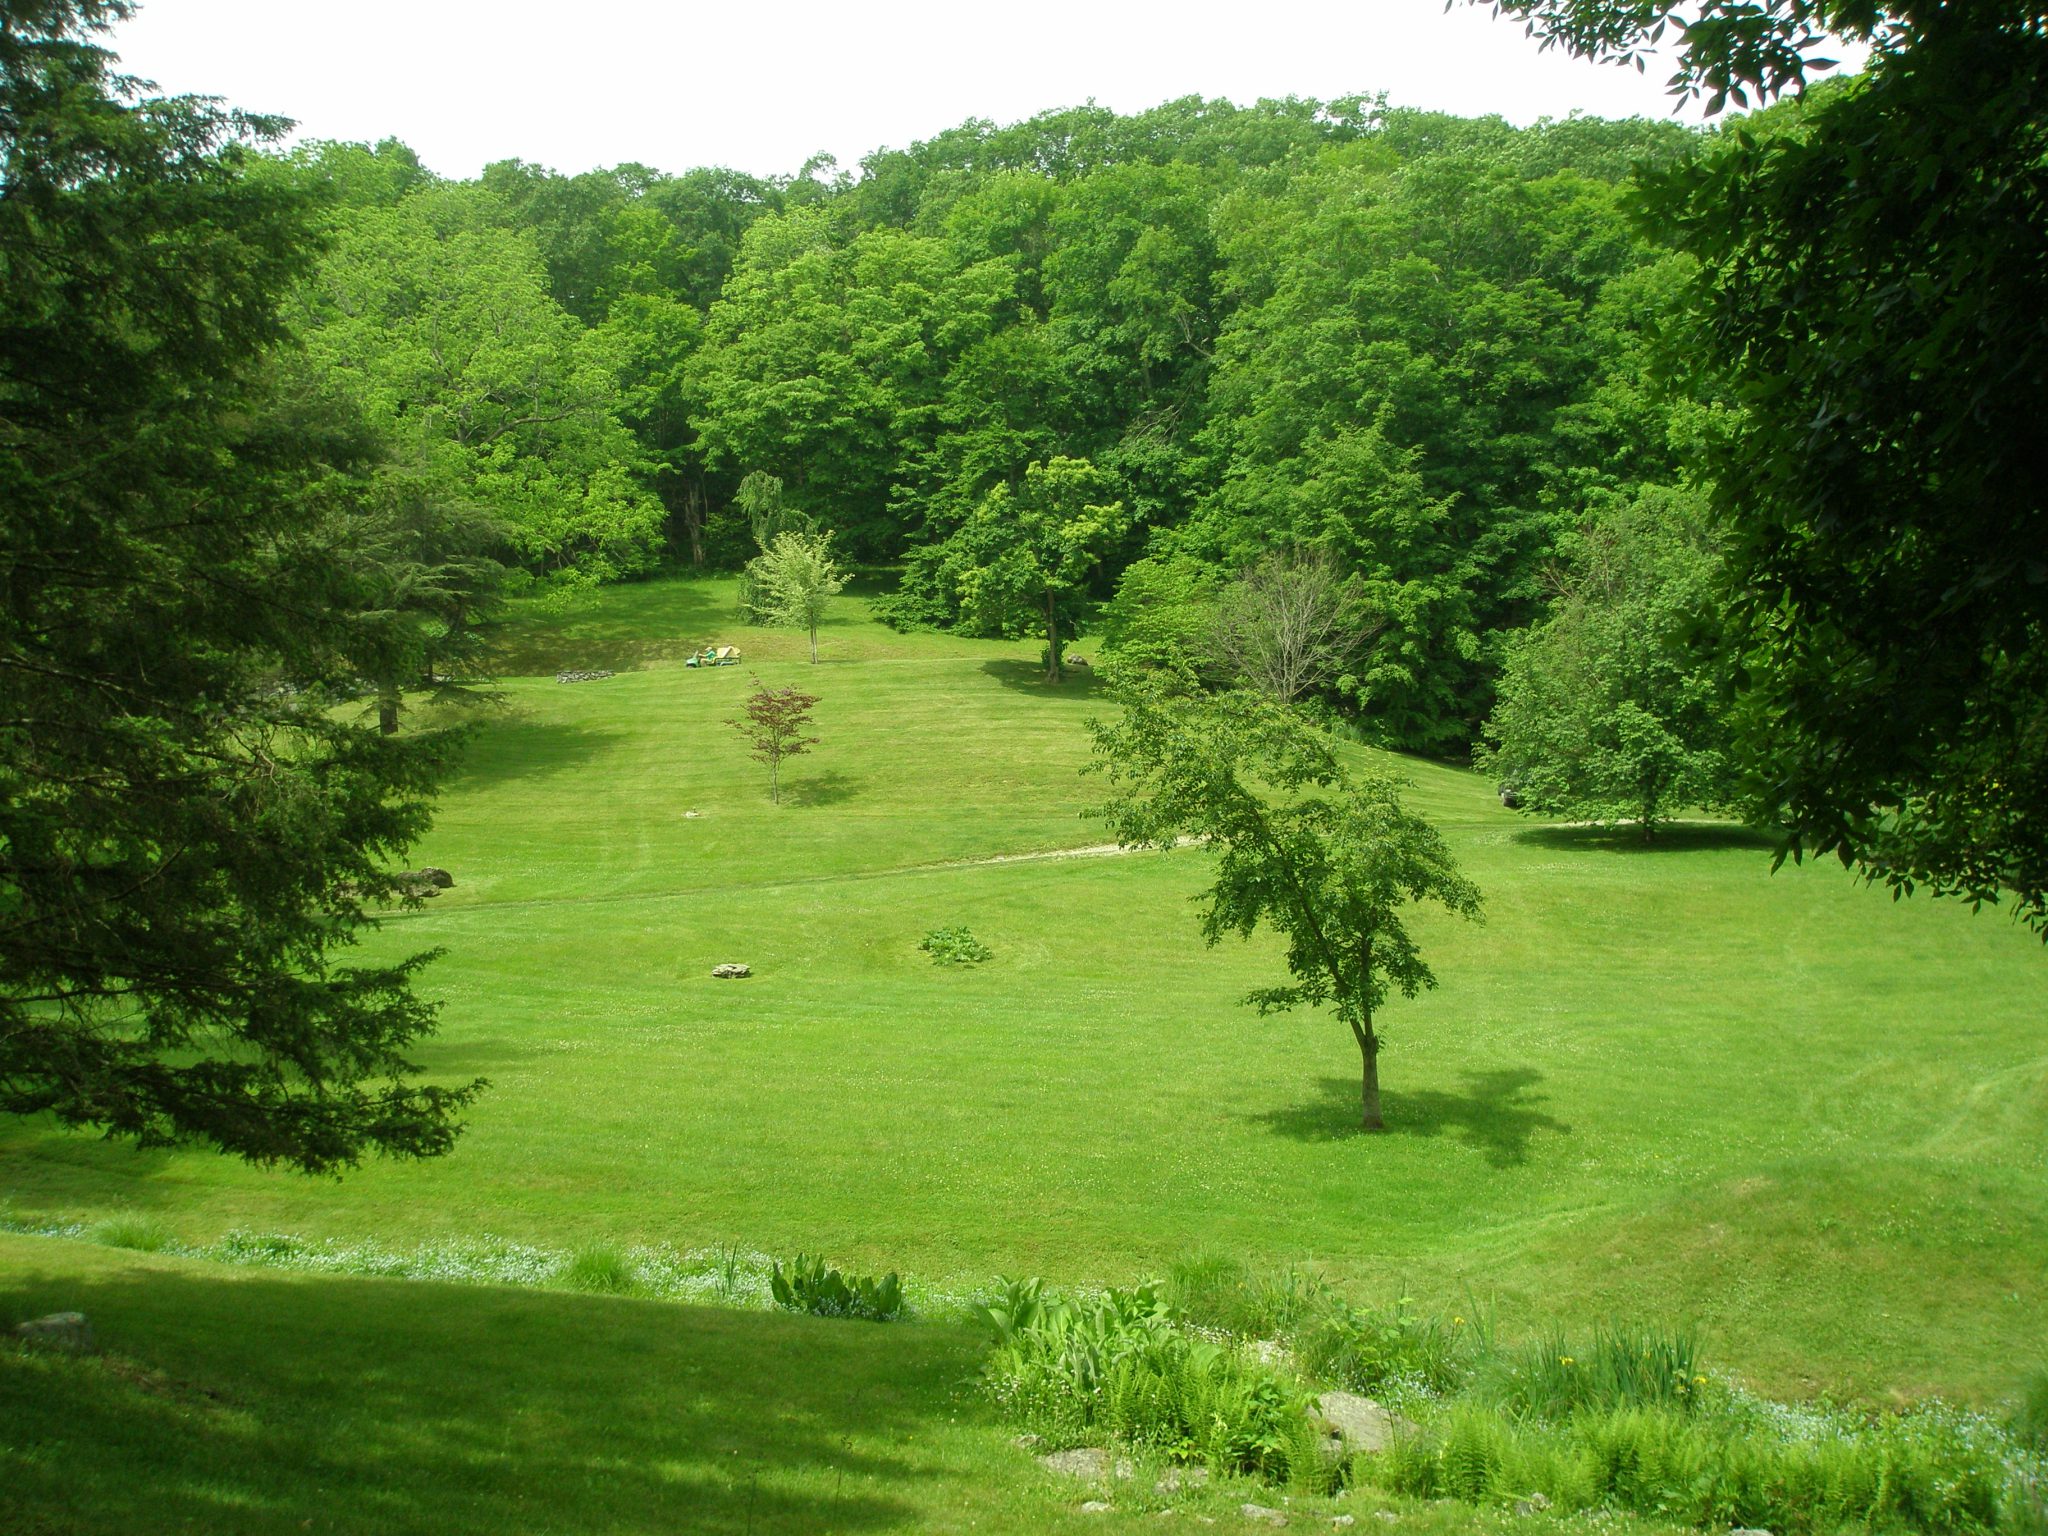 Looking down at the North Lawn from Tiptoe Rock